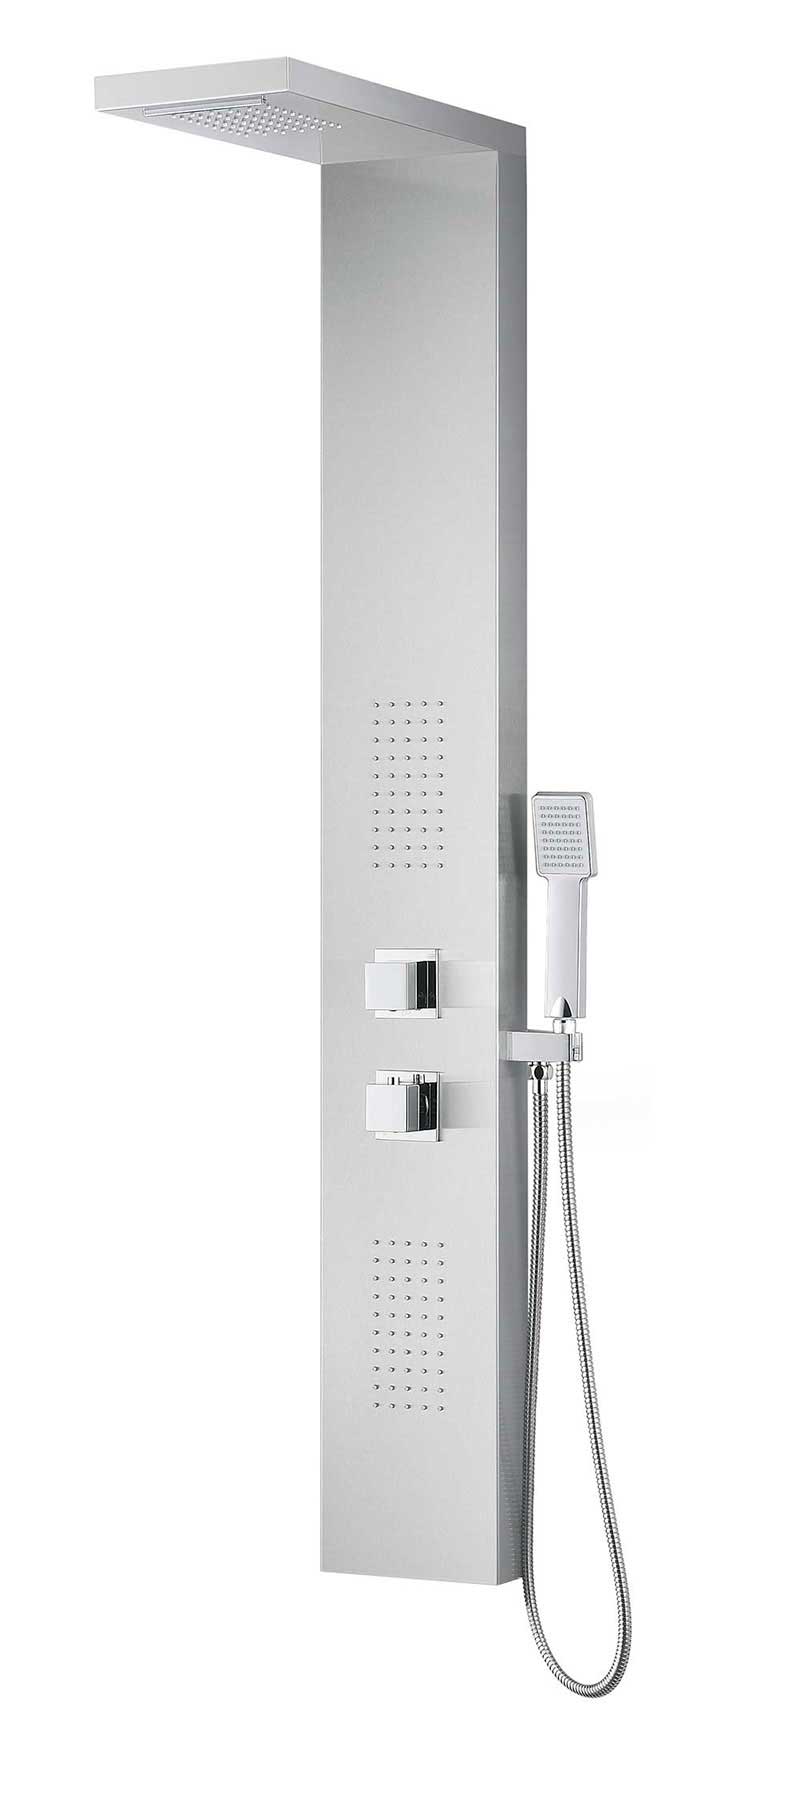 Anzzi EXPANSE Series 64 in. Full Body Shower Panel System with Heavy Rain Shower and Spray Wand in Brushed Steel